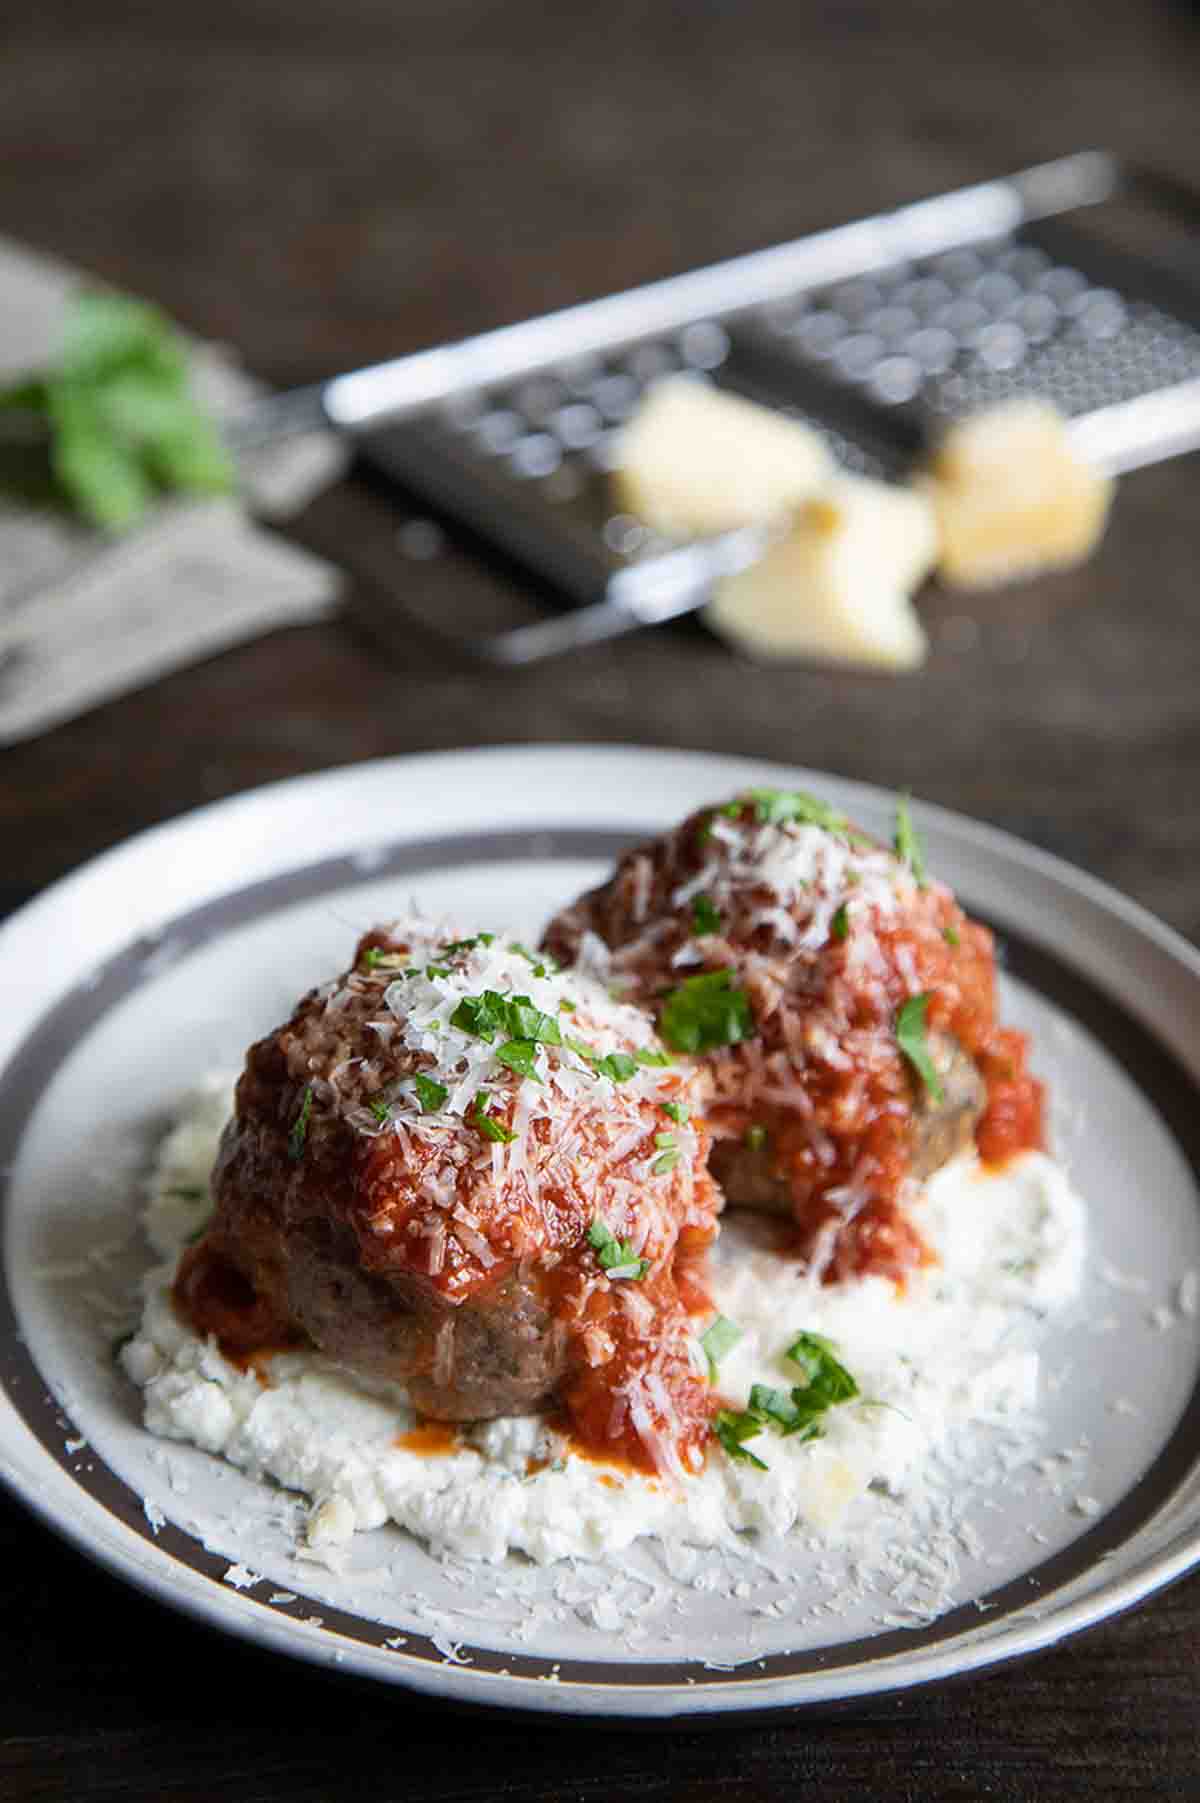 2 large meatballs on ricotta on a plate with tomato sauce